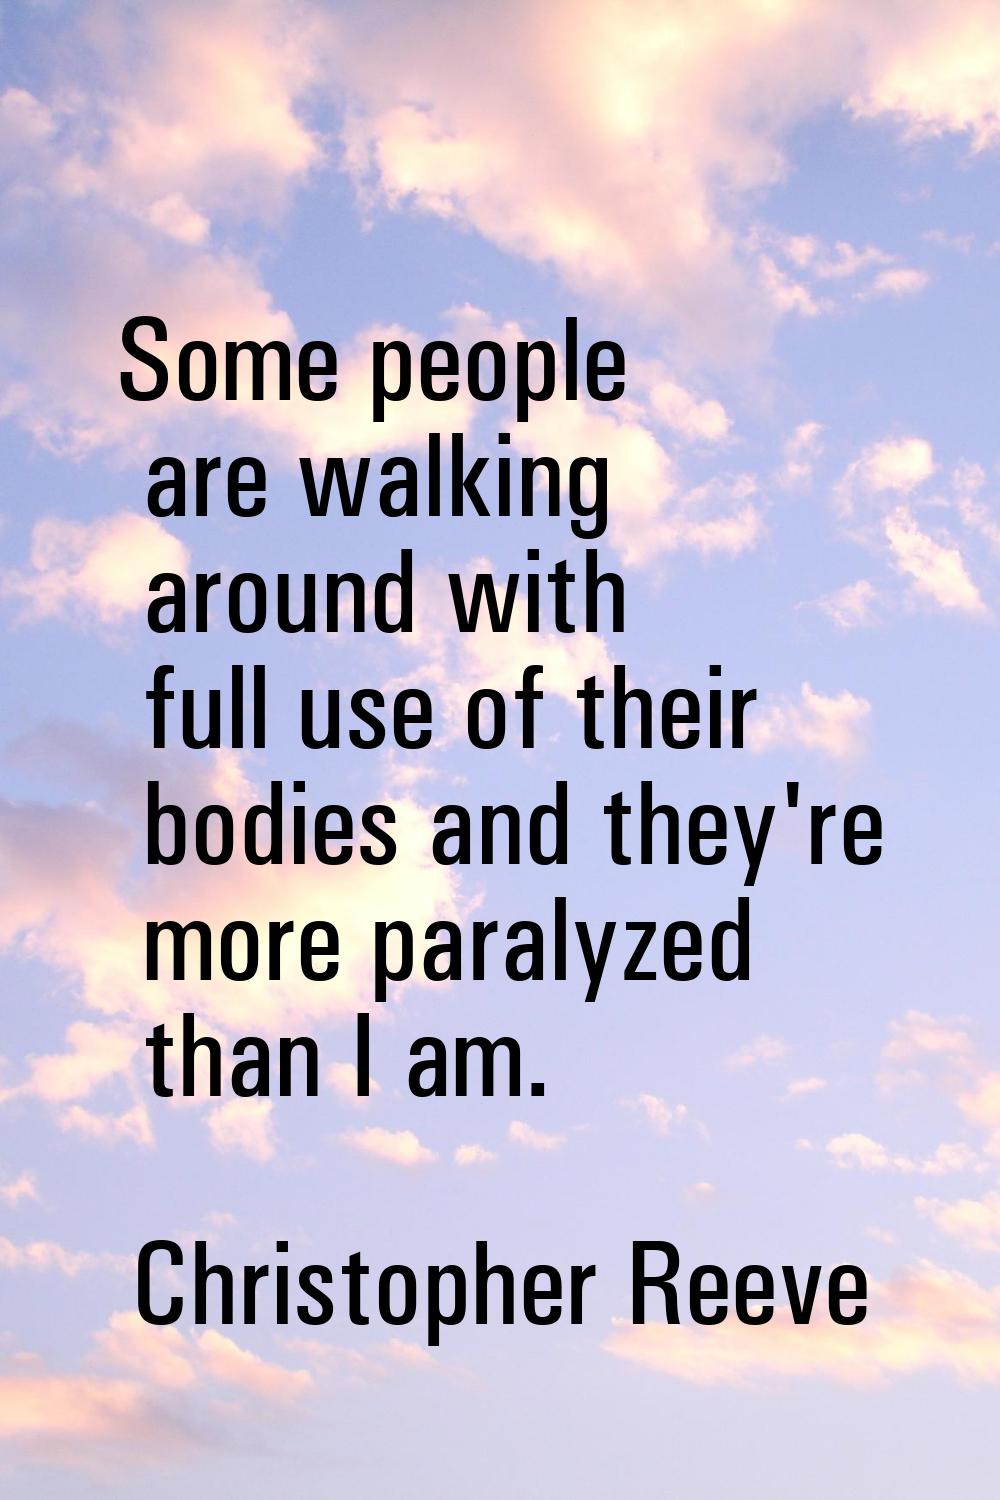 Some people are walking around with full use of their bodies and they're more paralyzed than I am.